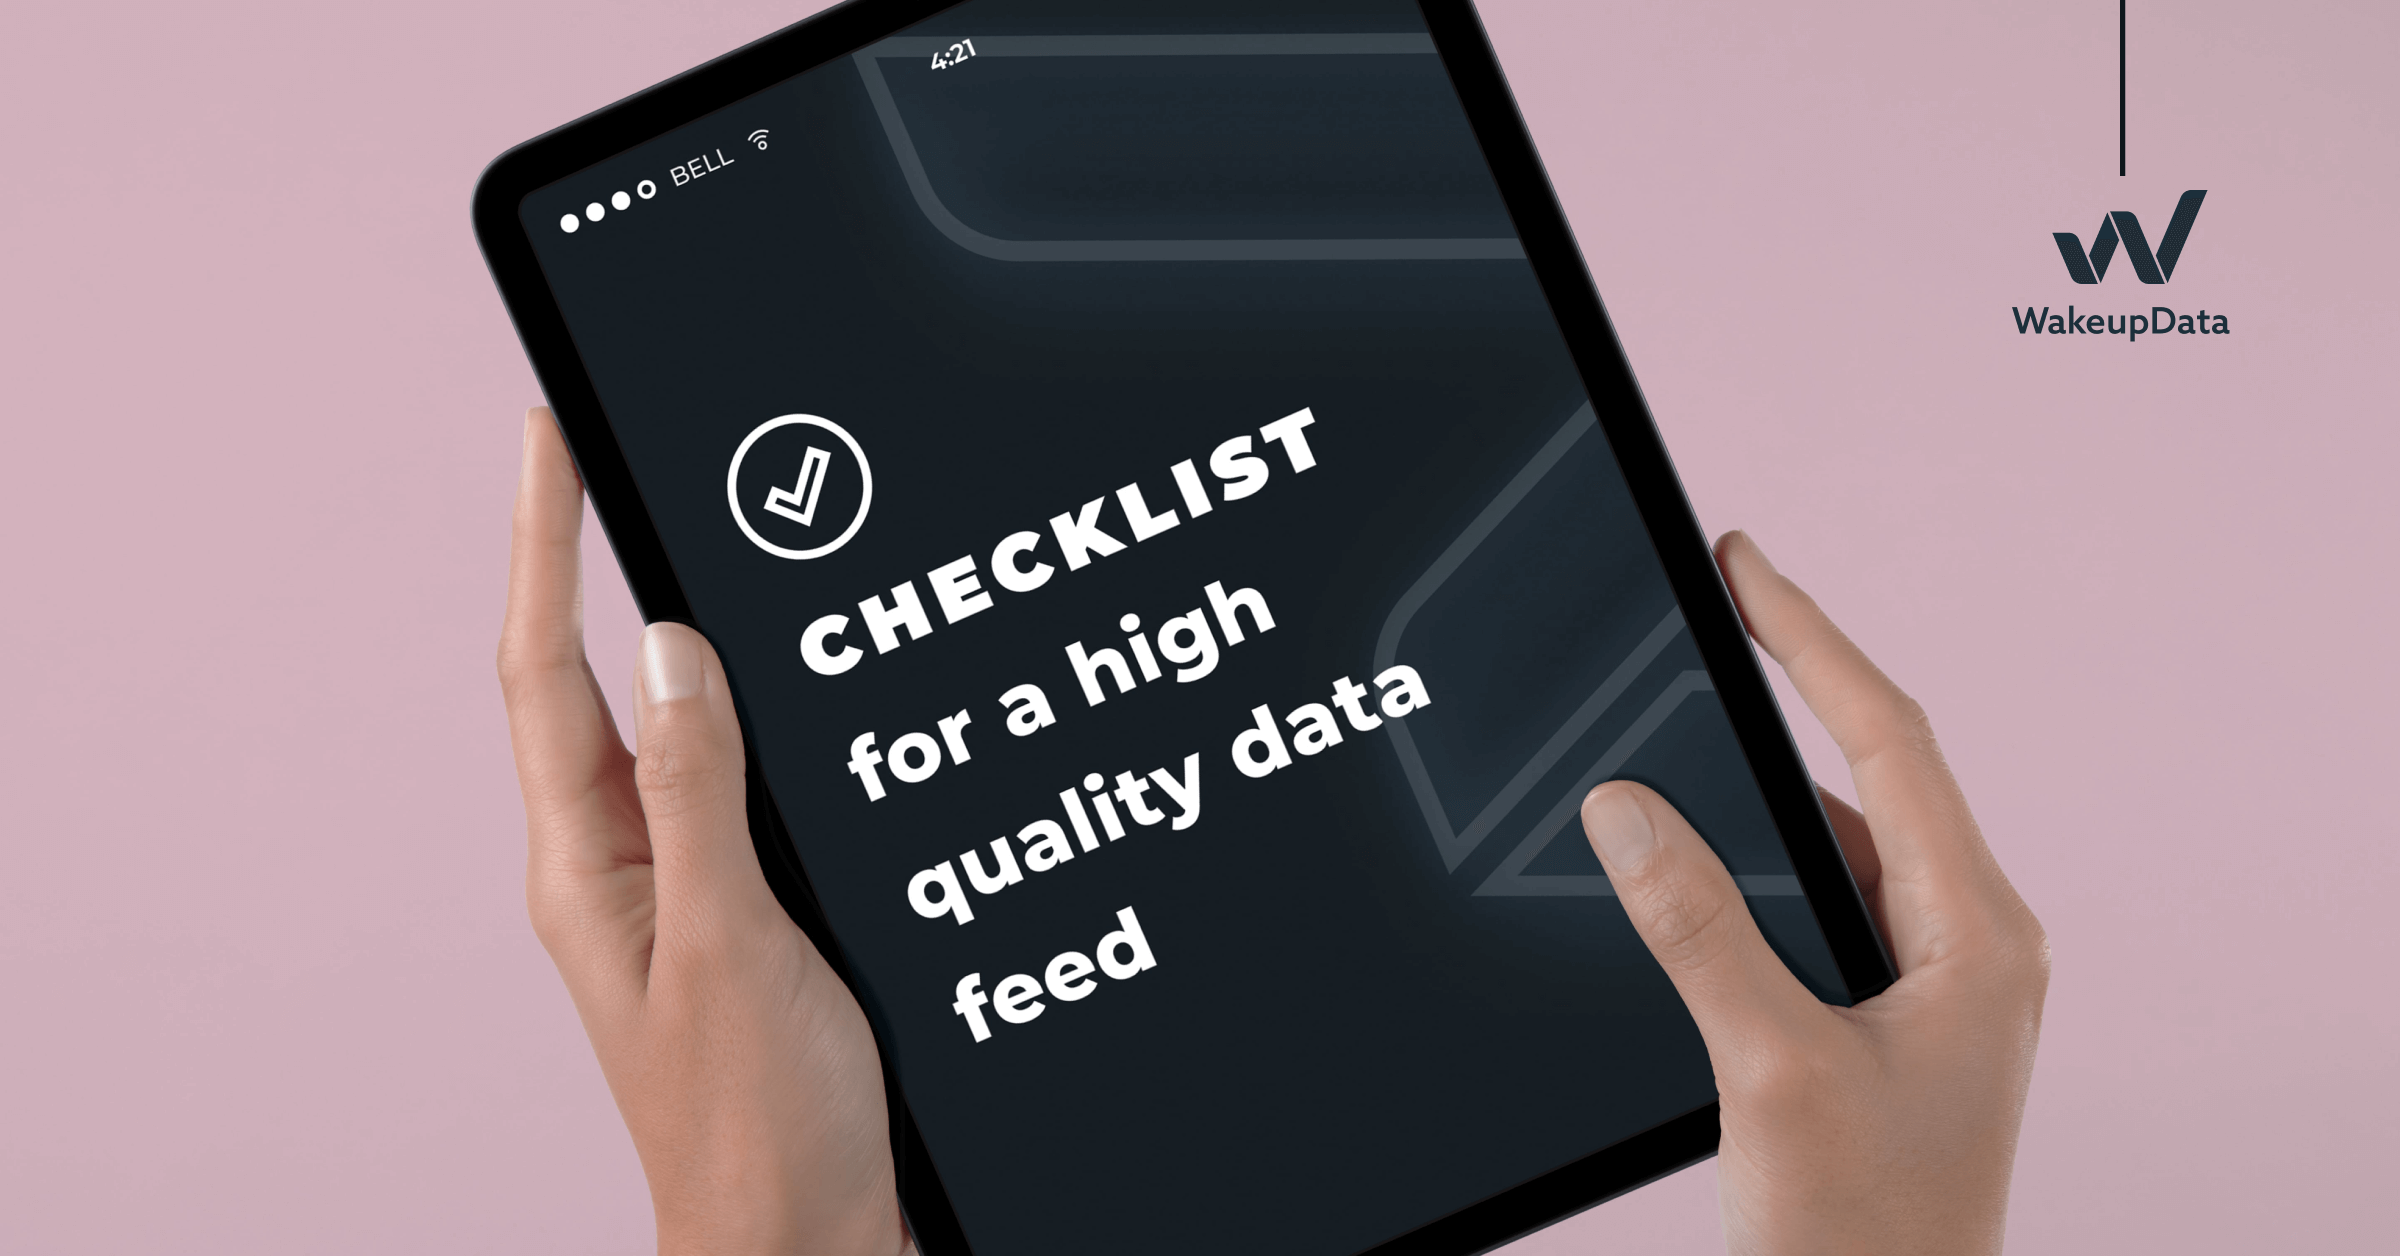 Checklist for a high quality data feed - what do you need?